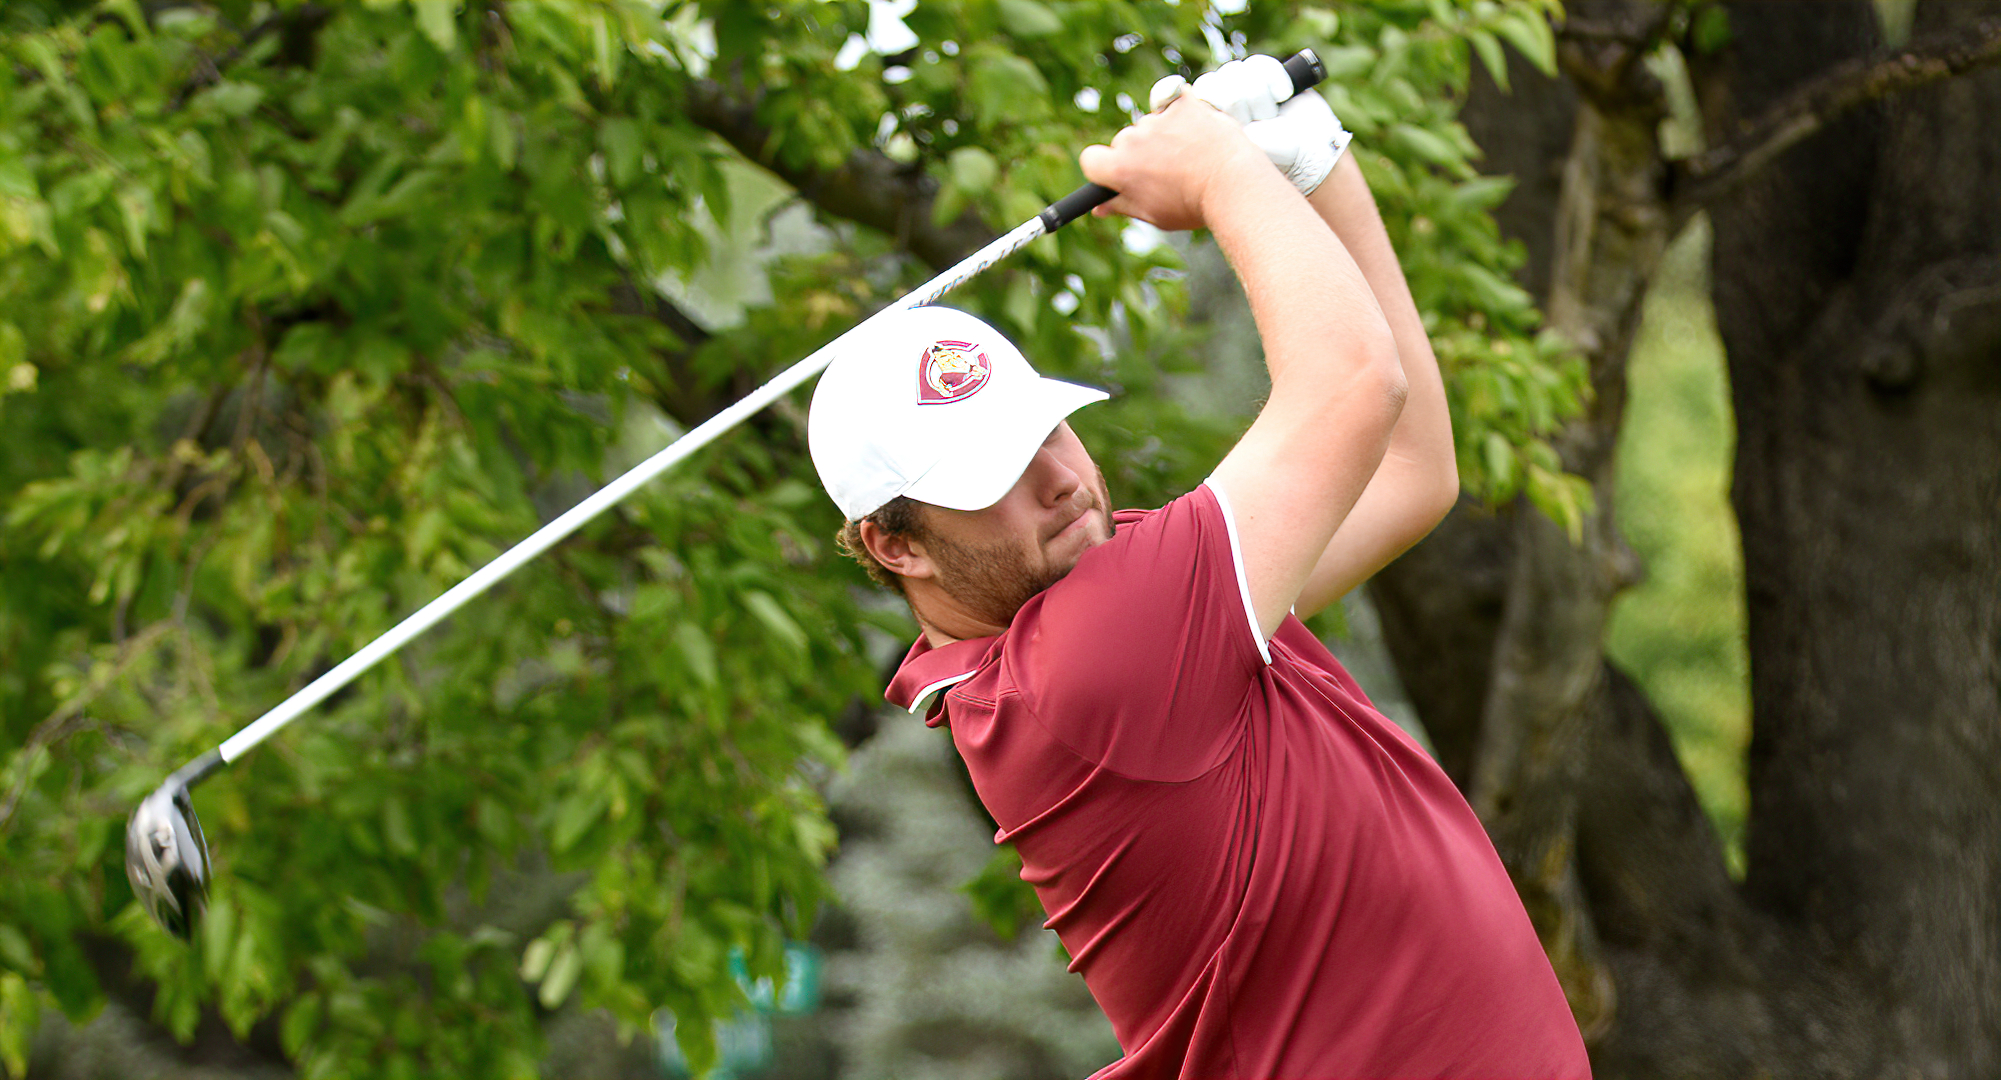 Senior Mason Opheim shot an even-par 72 on the final day of the Twin Cities Classic and finished in second place in the individual standings.